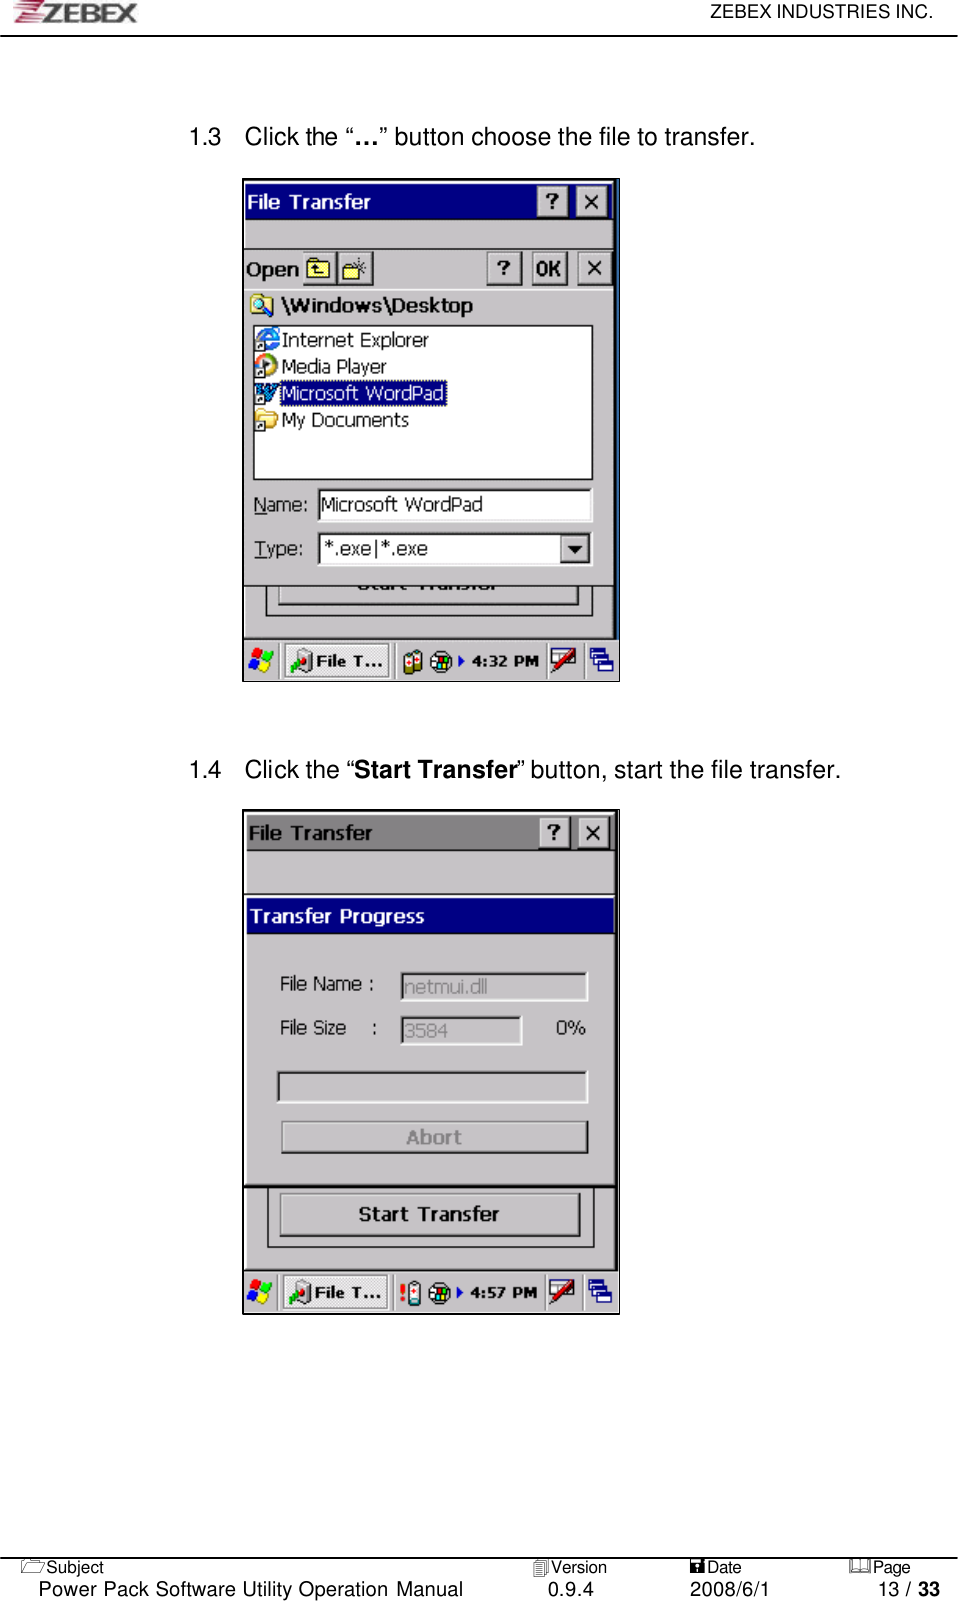     ZEBEX INDUSTRIES INC.   1Subject 4Version           =Date &amp;Page  Power Pack Software Utility Operation Manual 0.9.4    2008/6/1          13 / 33   1.3 Click the “…”  button choose the file to transfer.                      1.4 Click the “Start Transfer” button, start the file transfer.                               